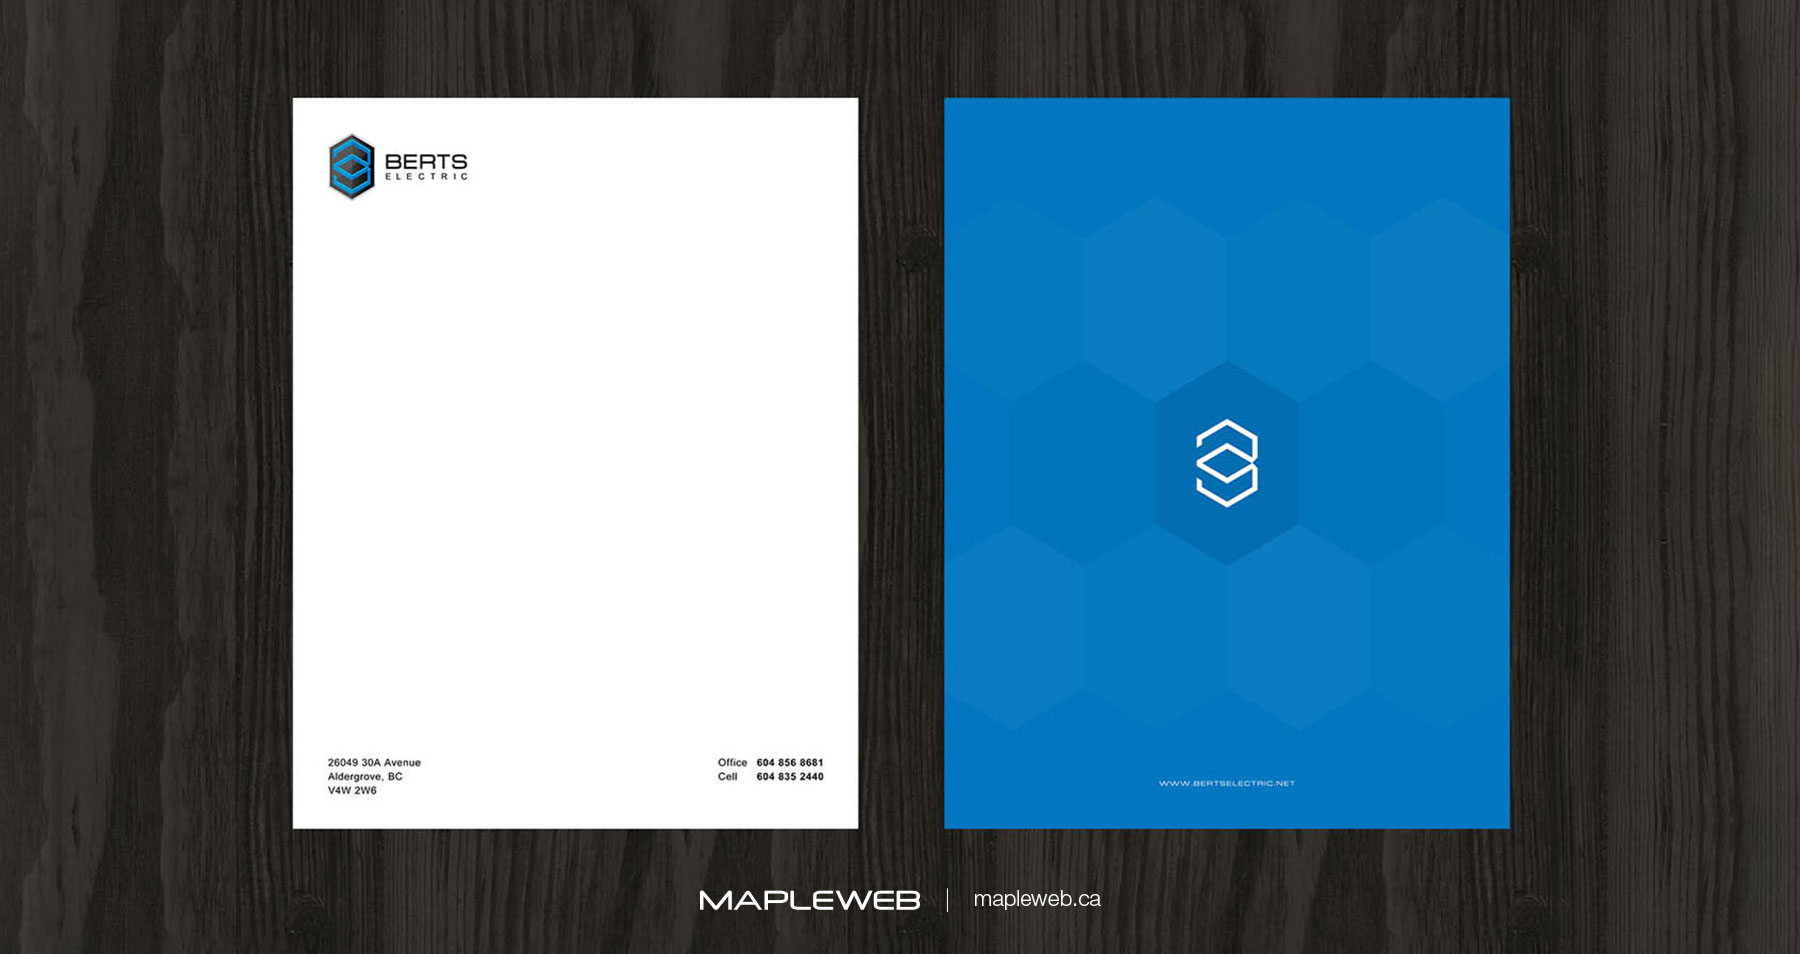 Berts Electric White and Blue Letterhead With Logo Brand design by Mapleweb